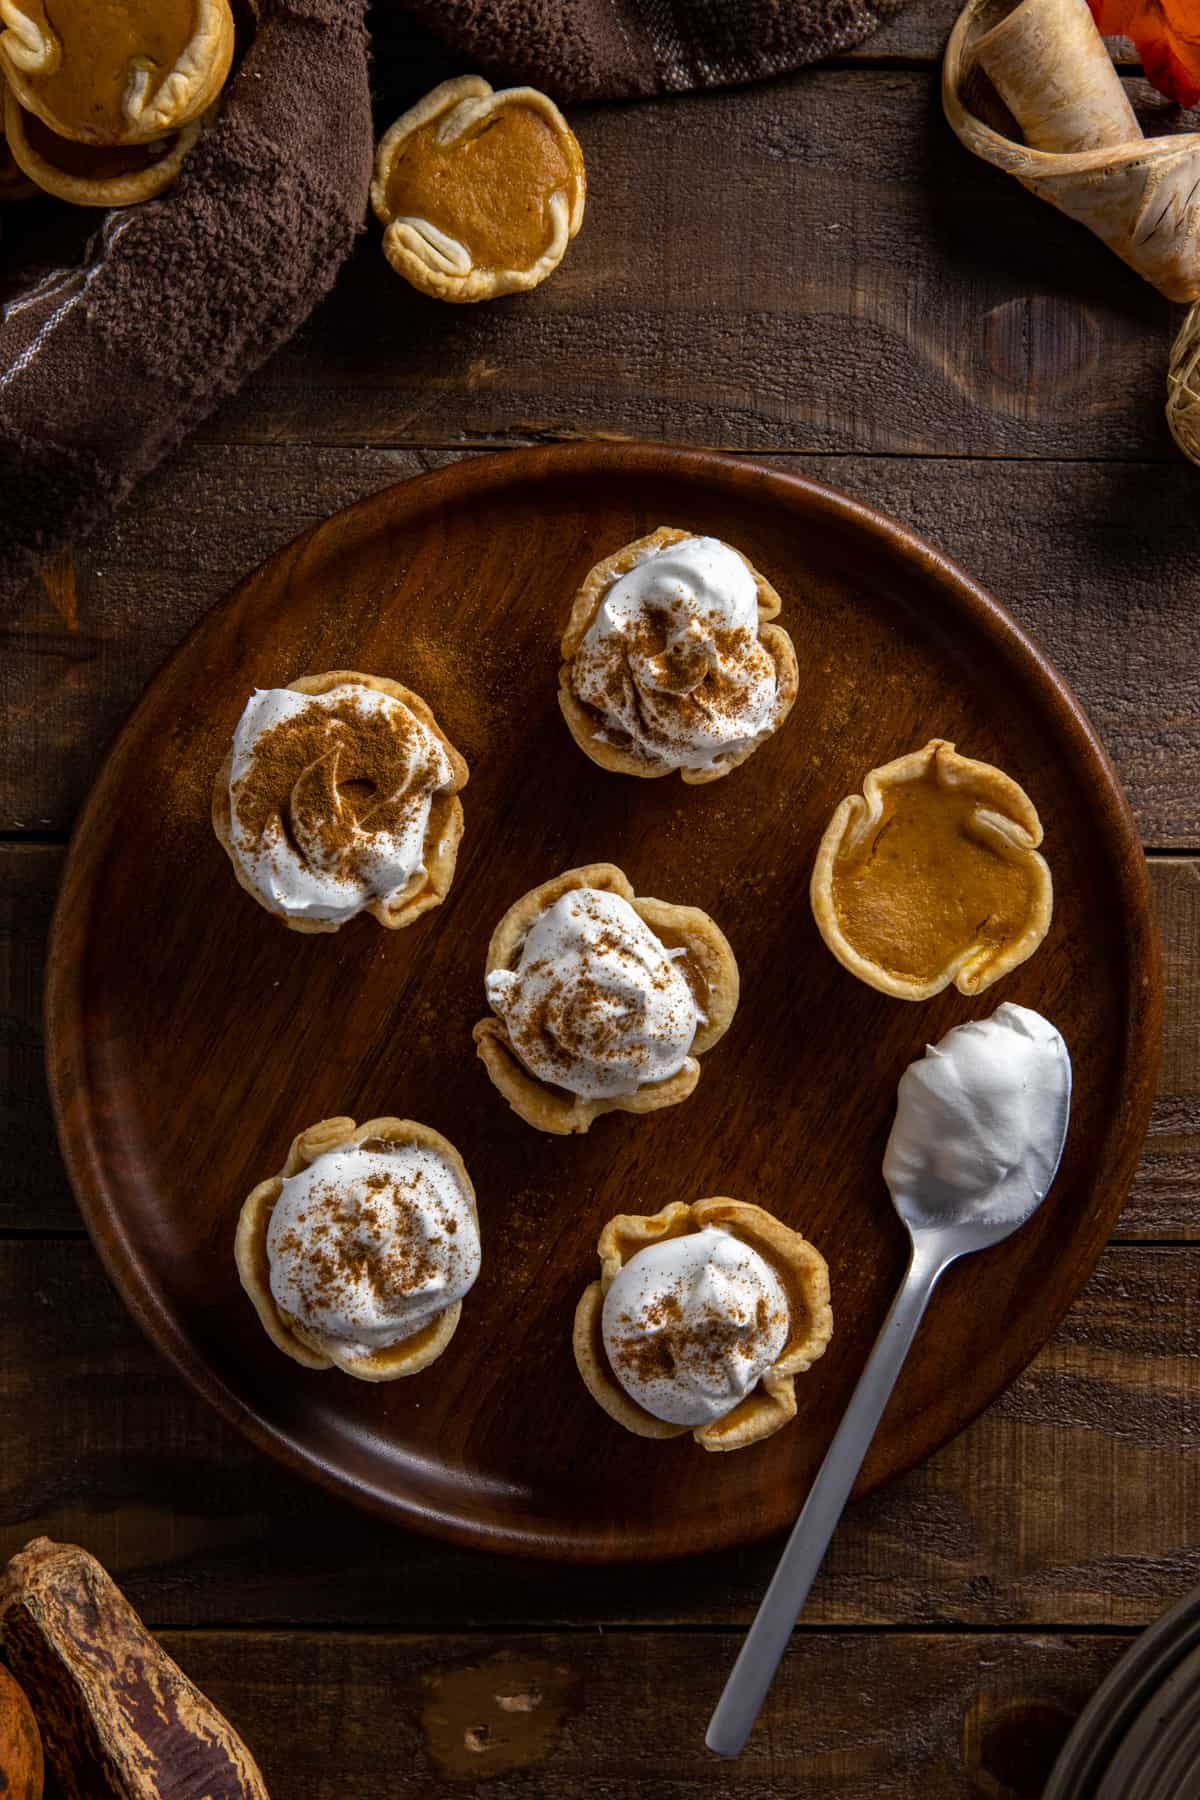 Six baked mini pumpkin pies on round wooden plate with spoonful of whipped topping on the side.